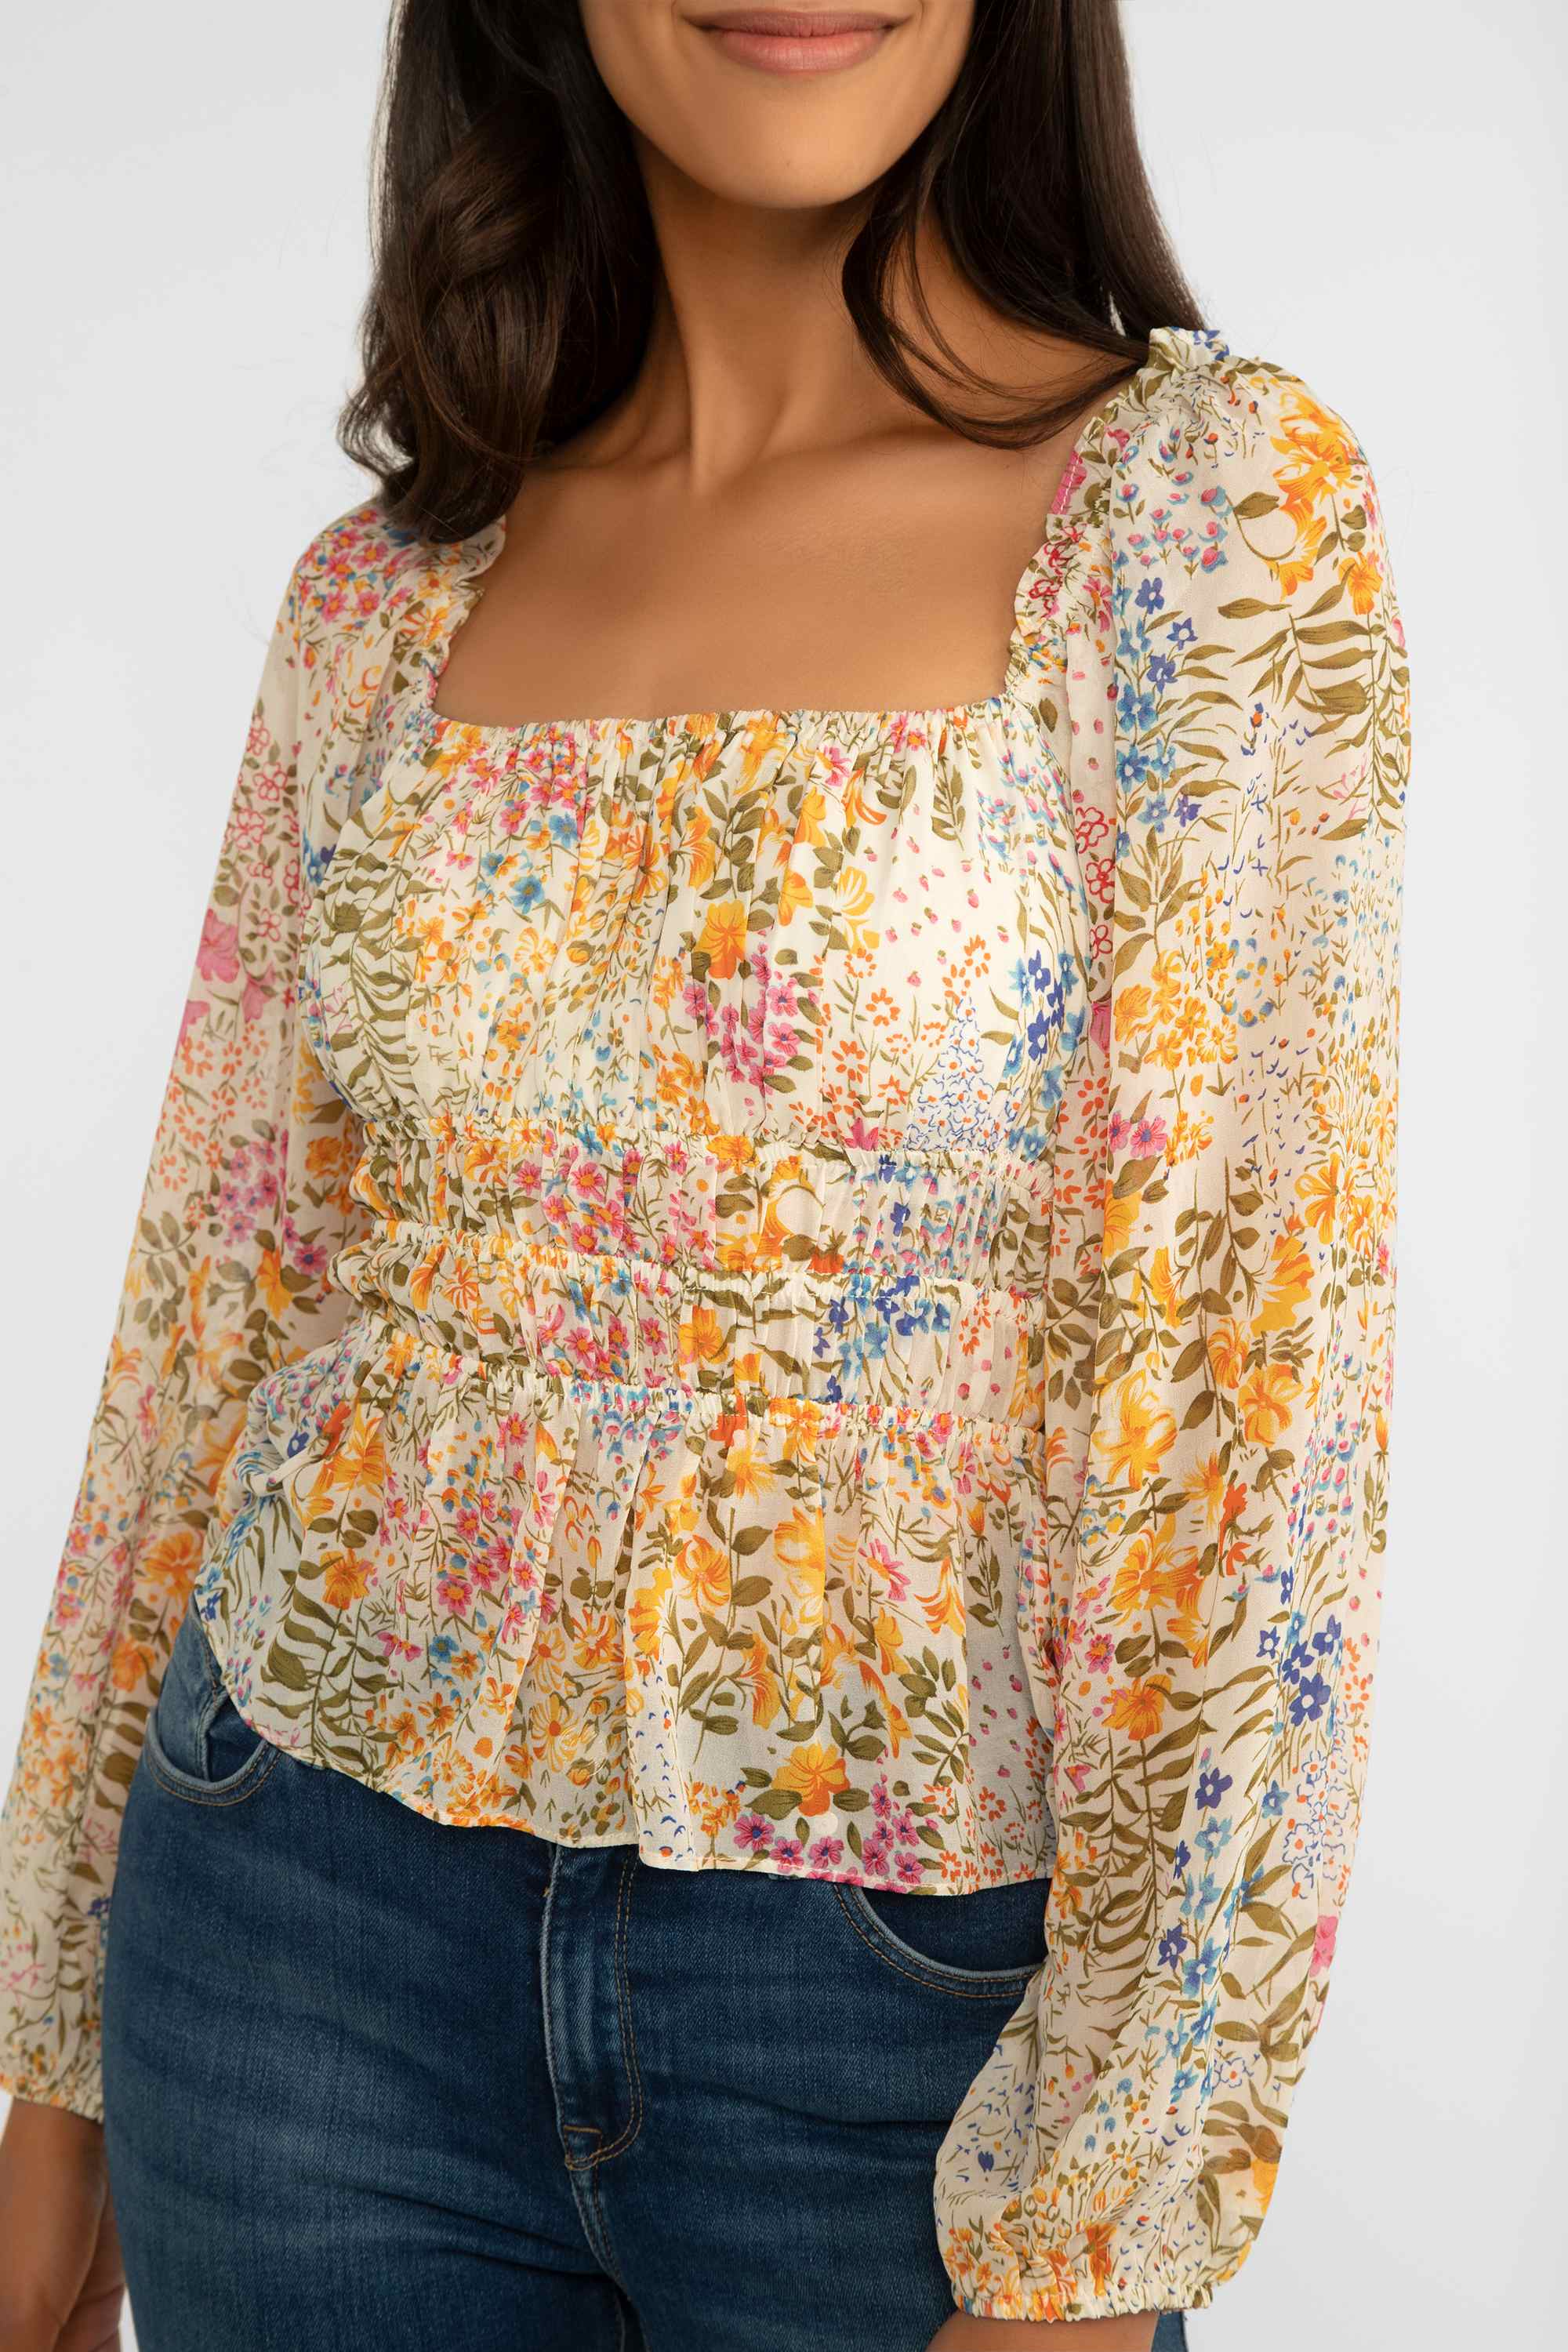 Lucy Paris (T2116) Women's Long Sleeve Cream Floral Chiffon Blouse with Square Neck and Gathered Waist